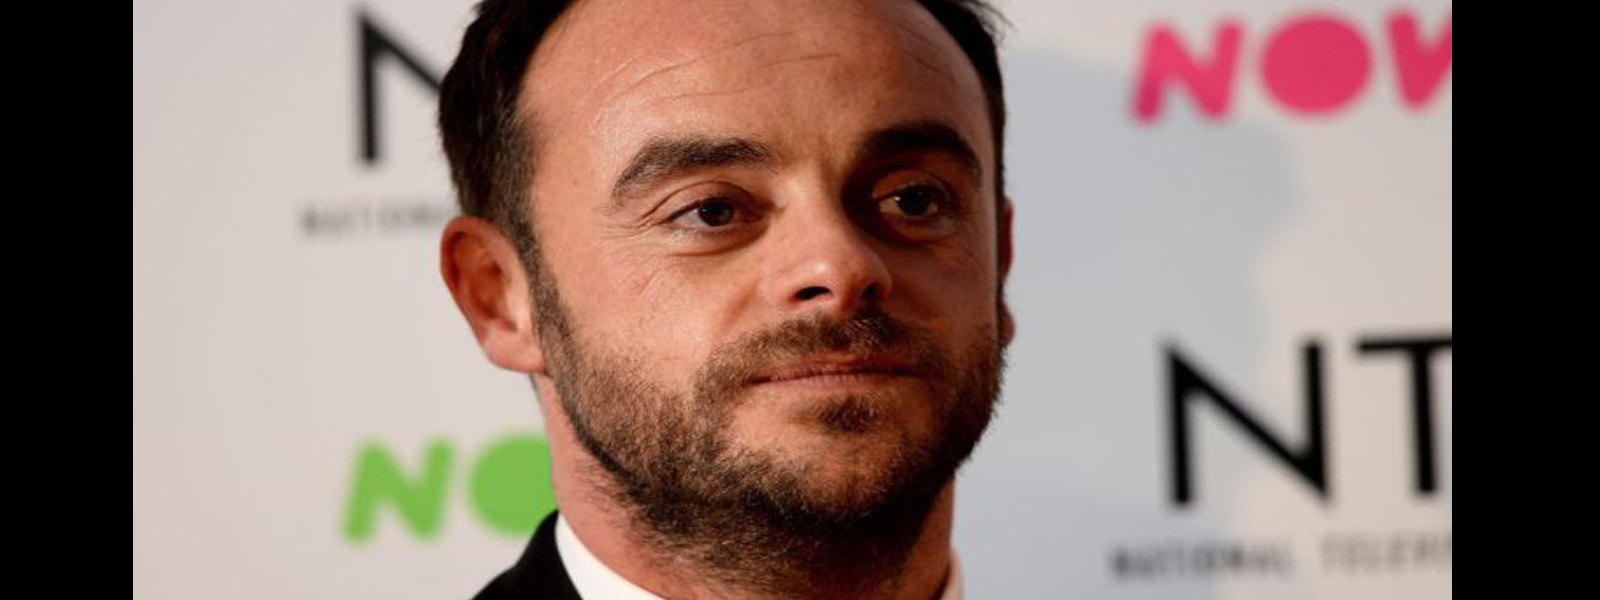 Ant McPartlin steps down from TV roles